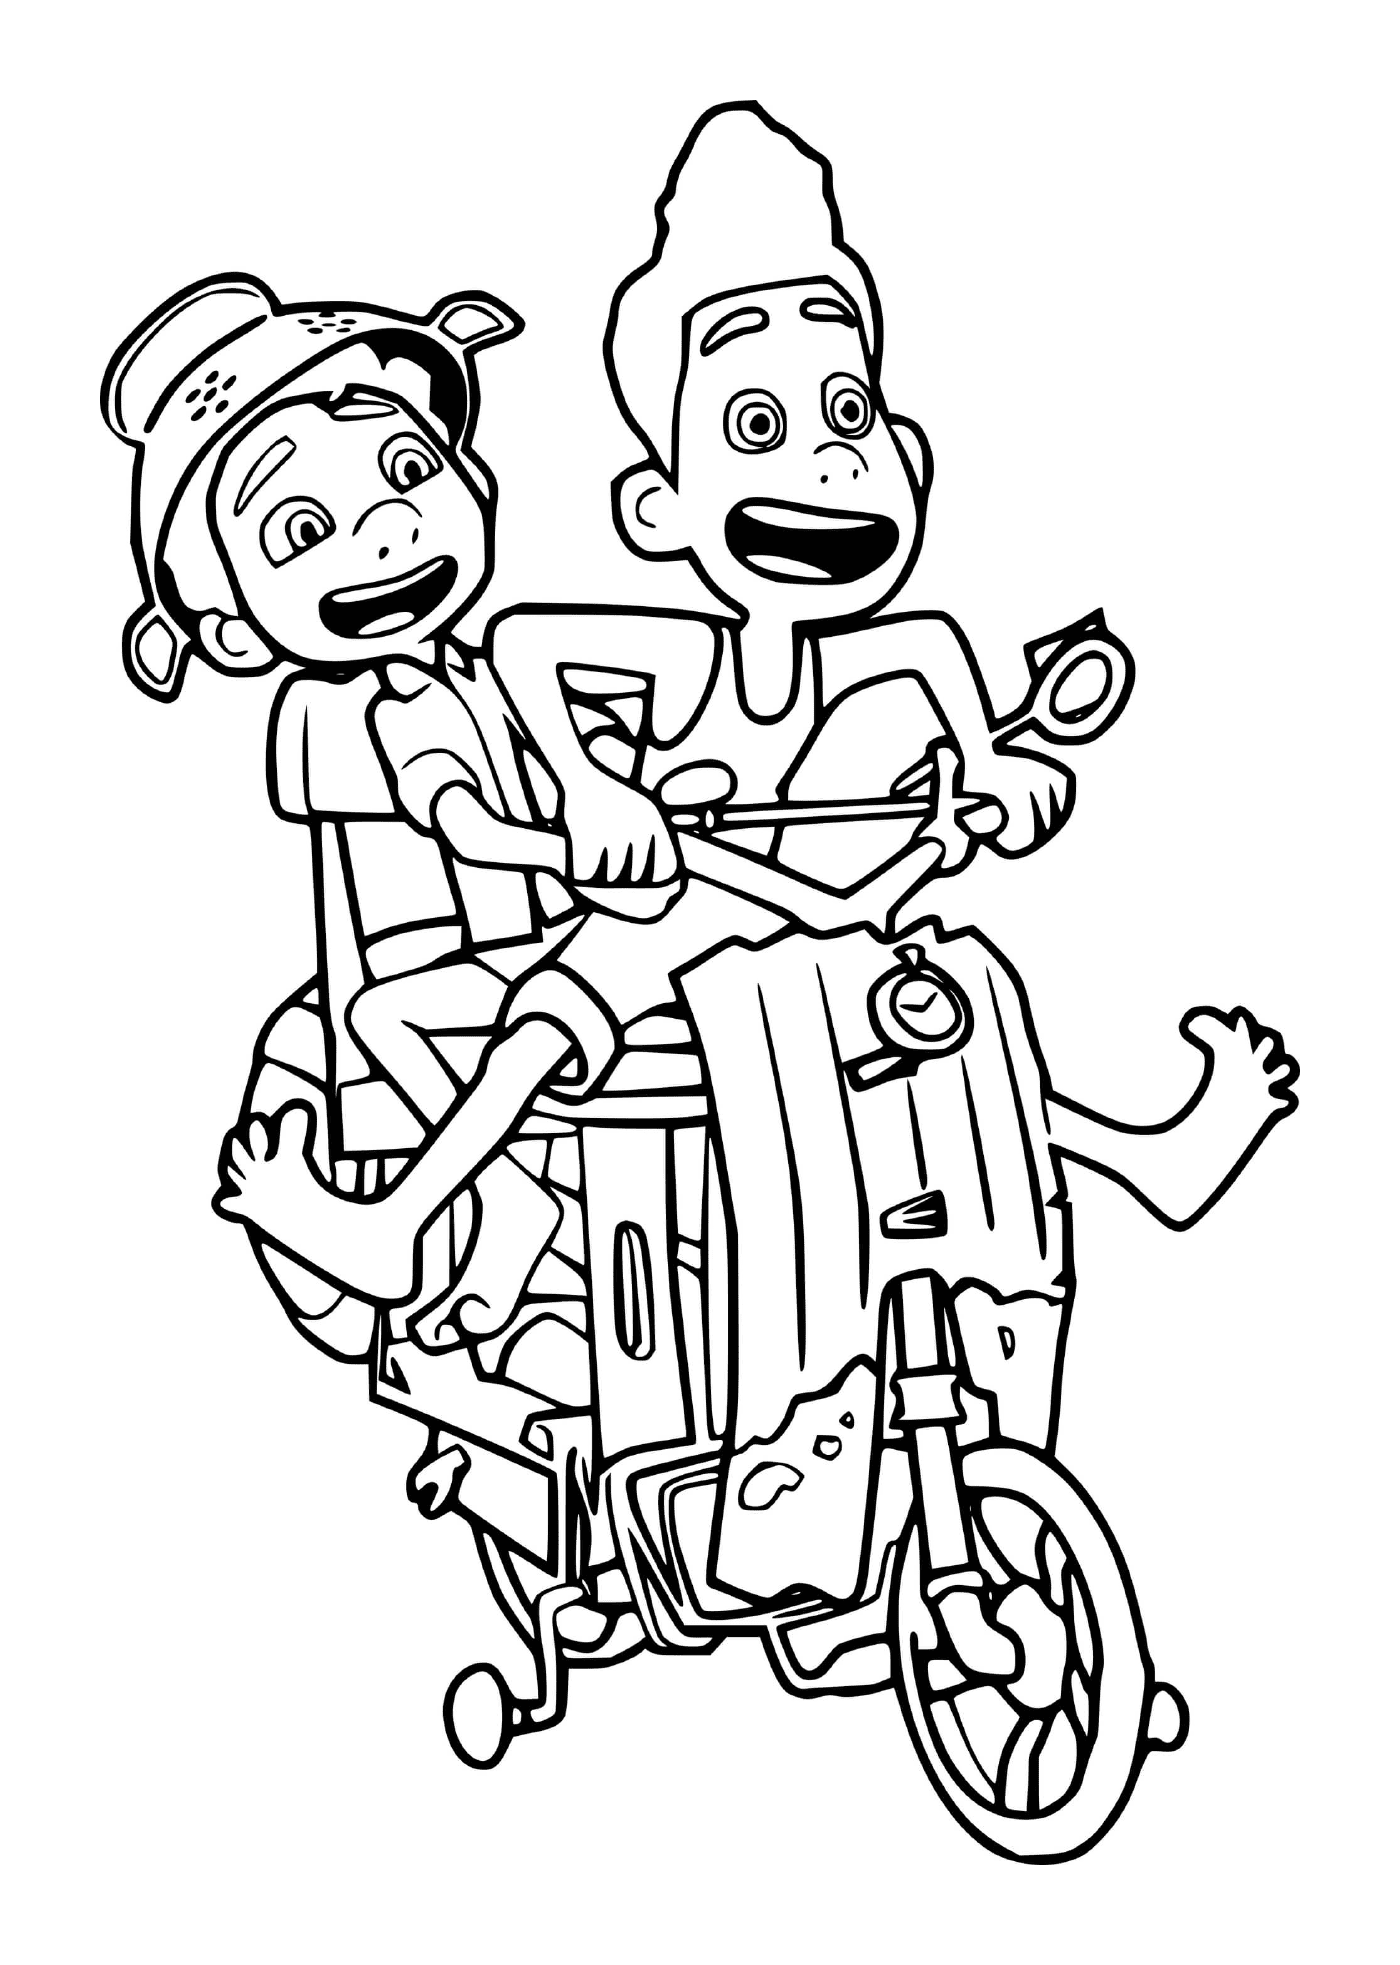  Boy and girl on a motorcycle 